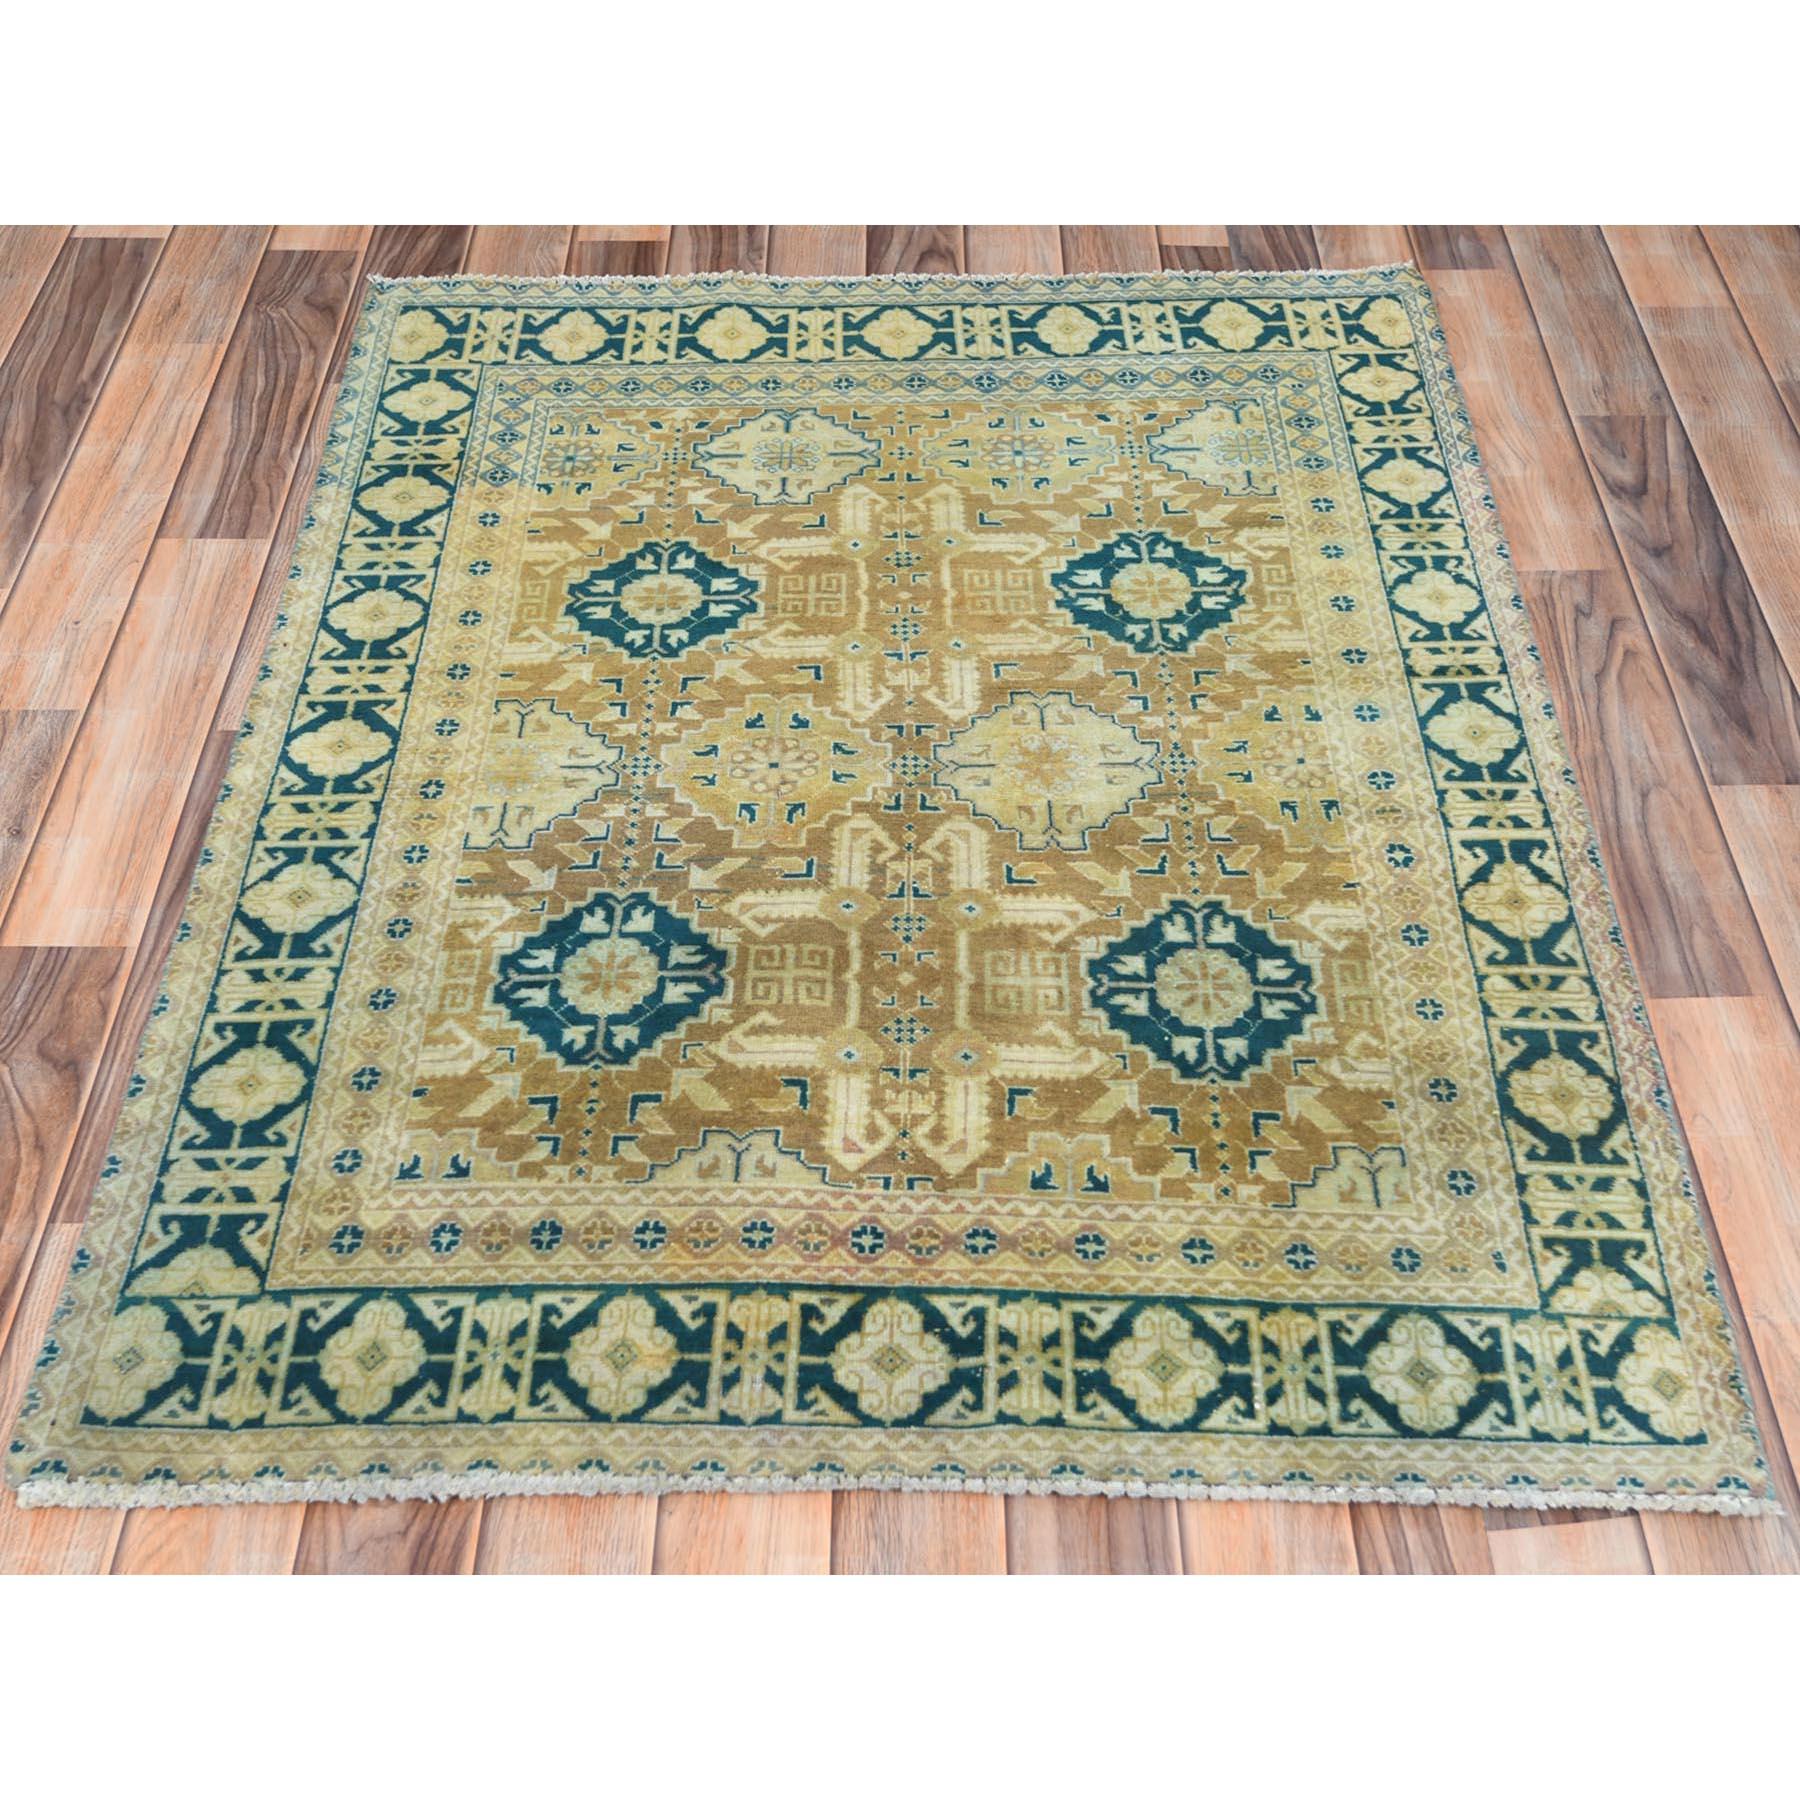 This fabulous hand-knotted carpet has been created and designed for extra strength and durability. This rug has been handcrafted for weeks in the traditional method that is used to make
Exact Rug Size in Feet and Inches : 3'3